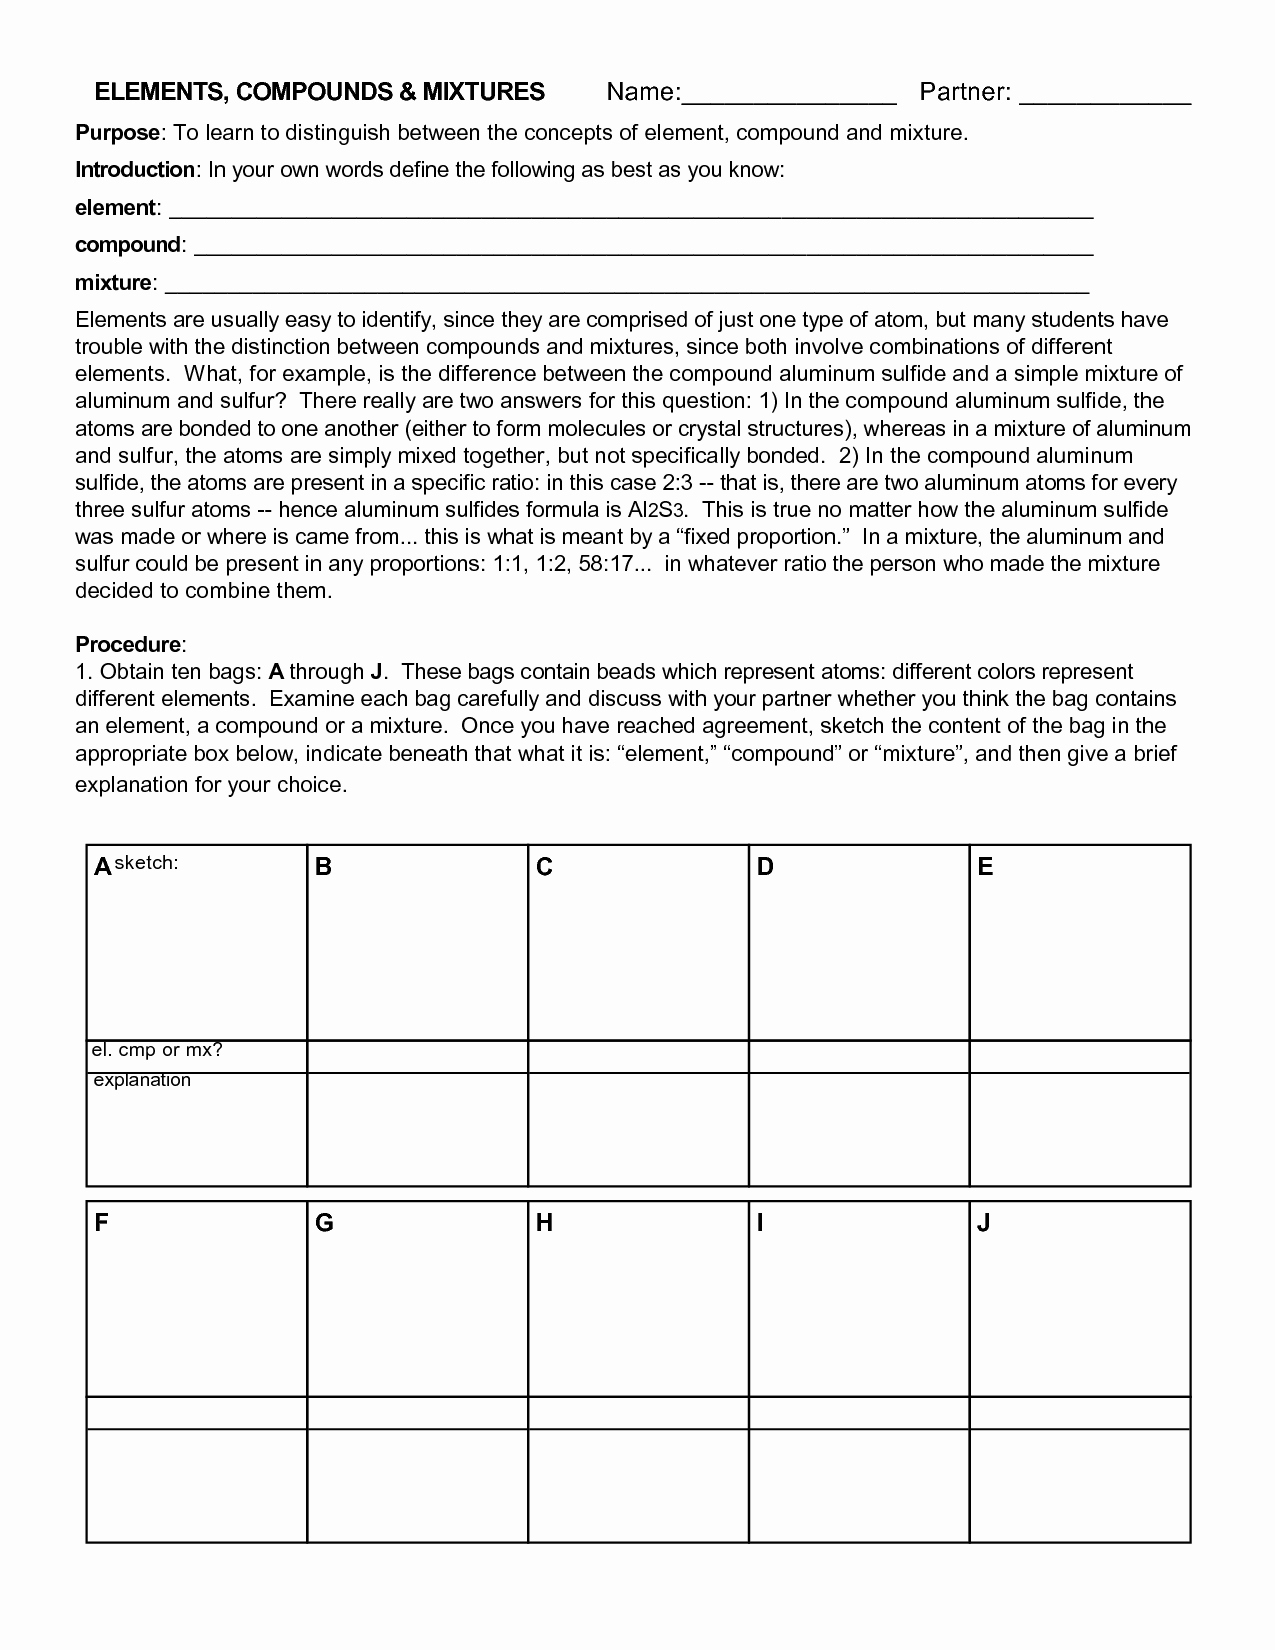 Elements Compounds Mixtures Worksheet Answers New Engineering An Empire Aztecs Worksheet Answers